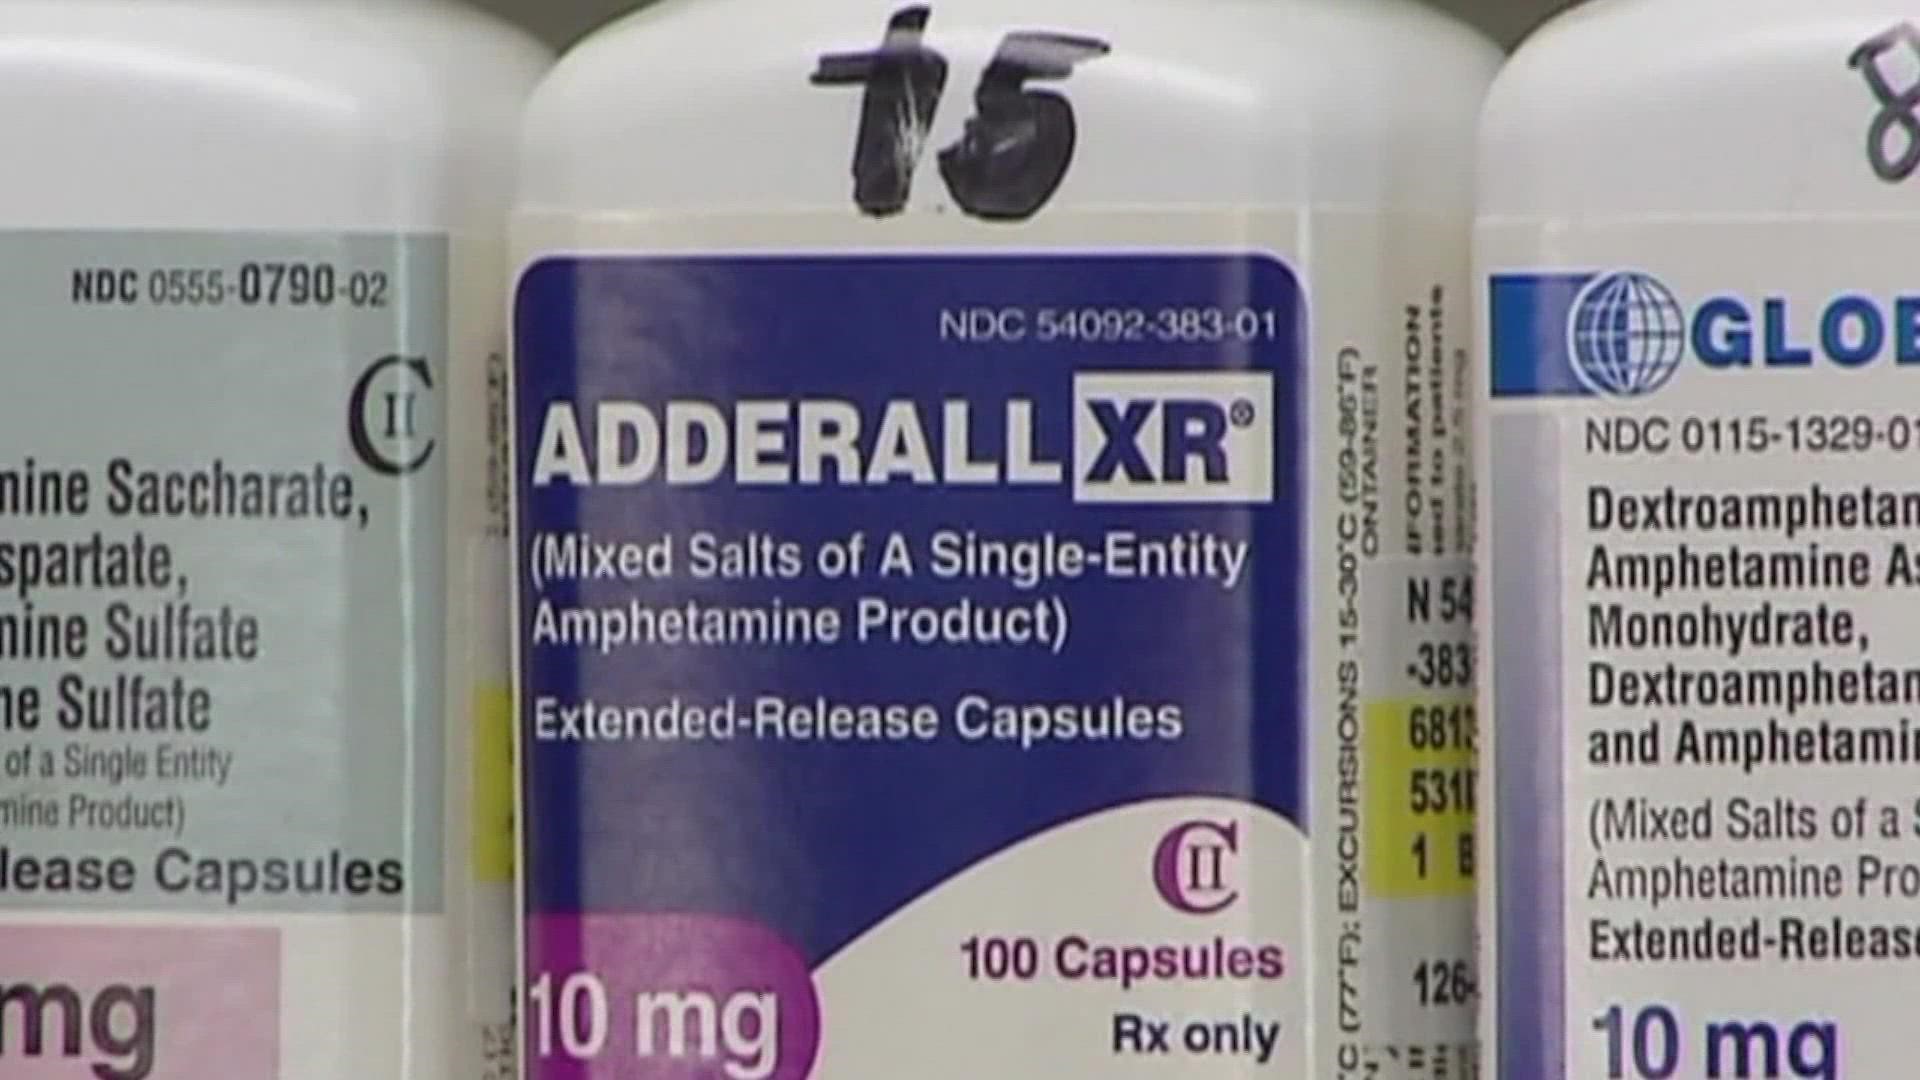 FDA says Americans face nationwide shortage of Adderall